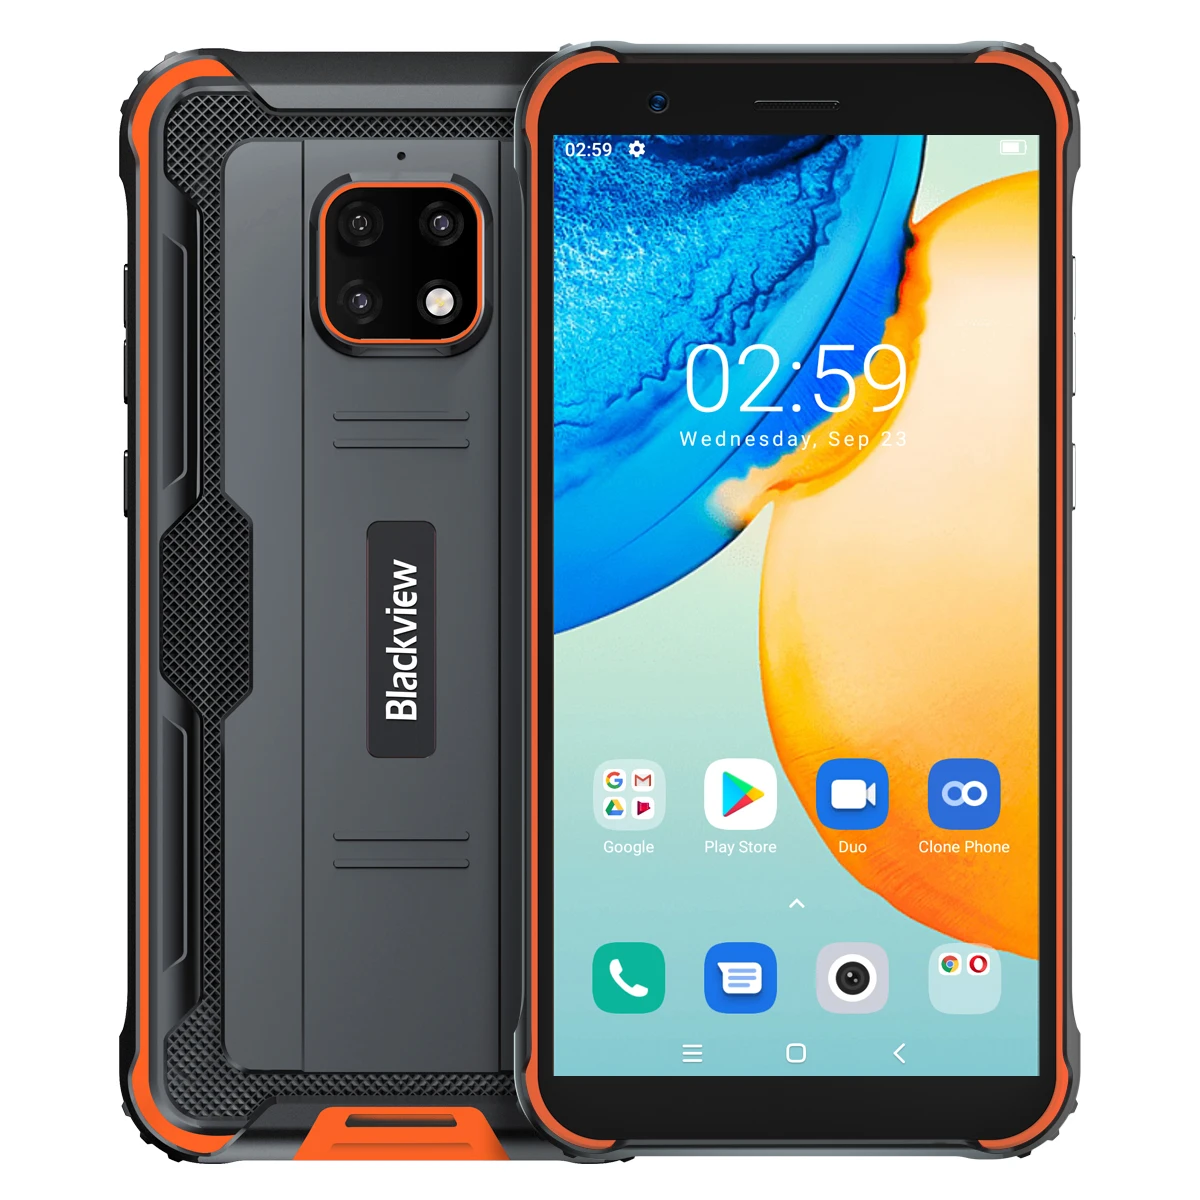 

BV4900 Pro 5580mAh IP68 Waterproof Rugged Smartphone 5.7'' 4GB 64GB Android 10.0 Octa Core Mobile Phone NFC